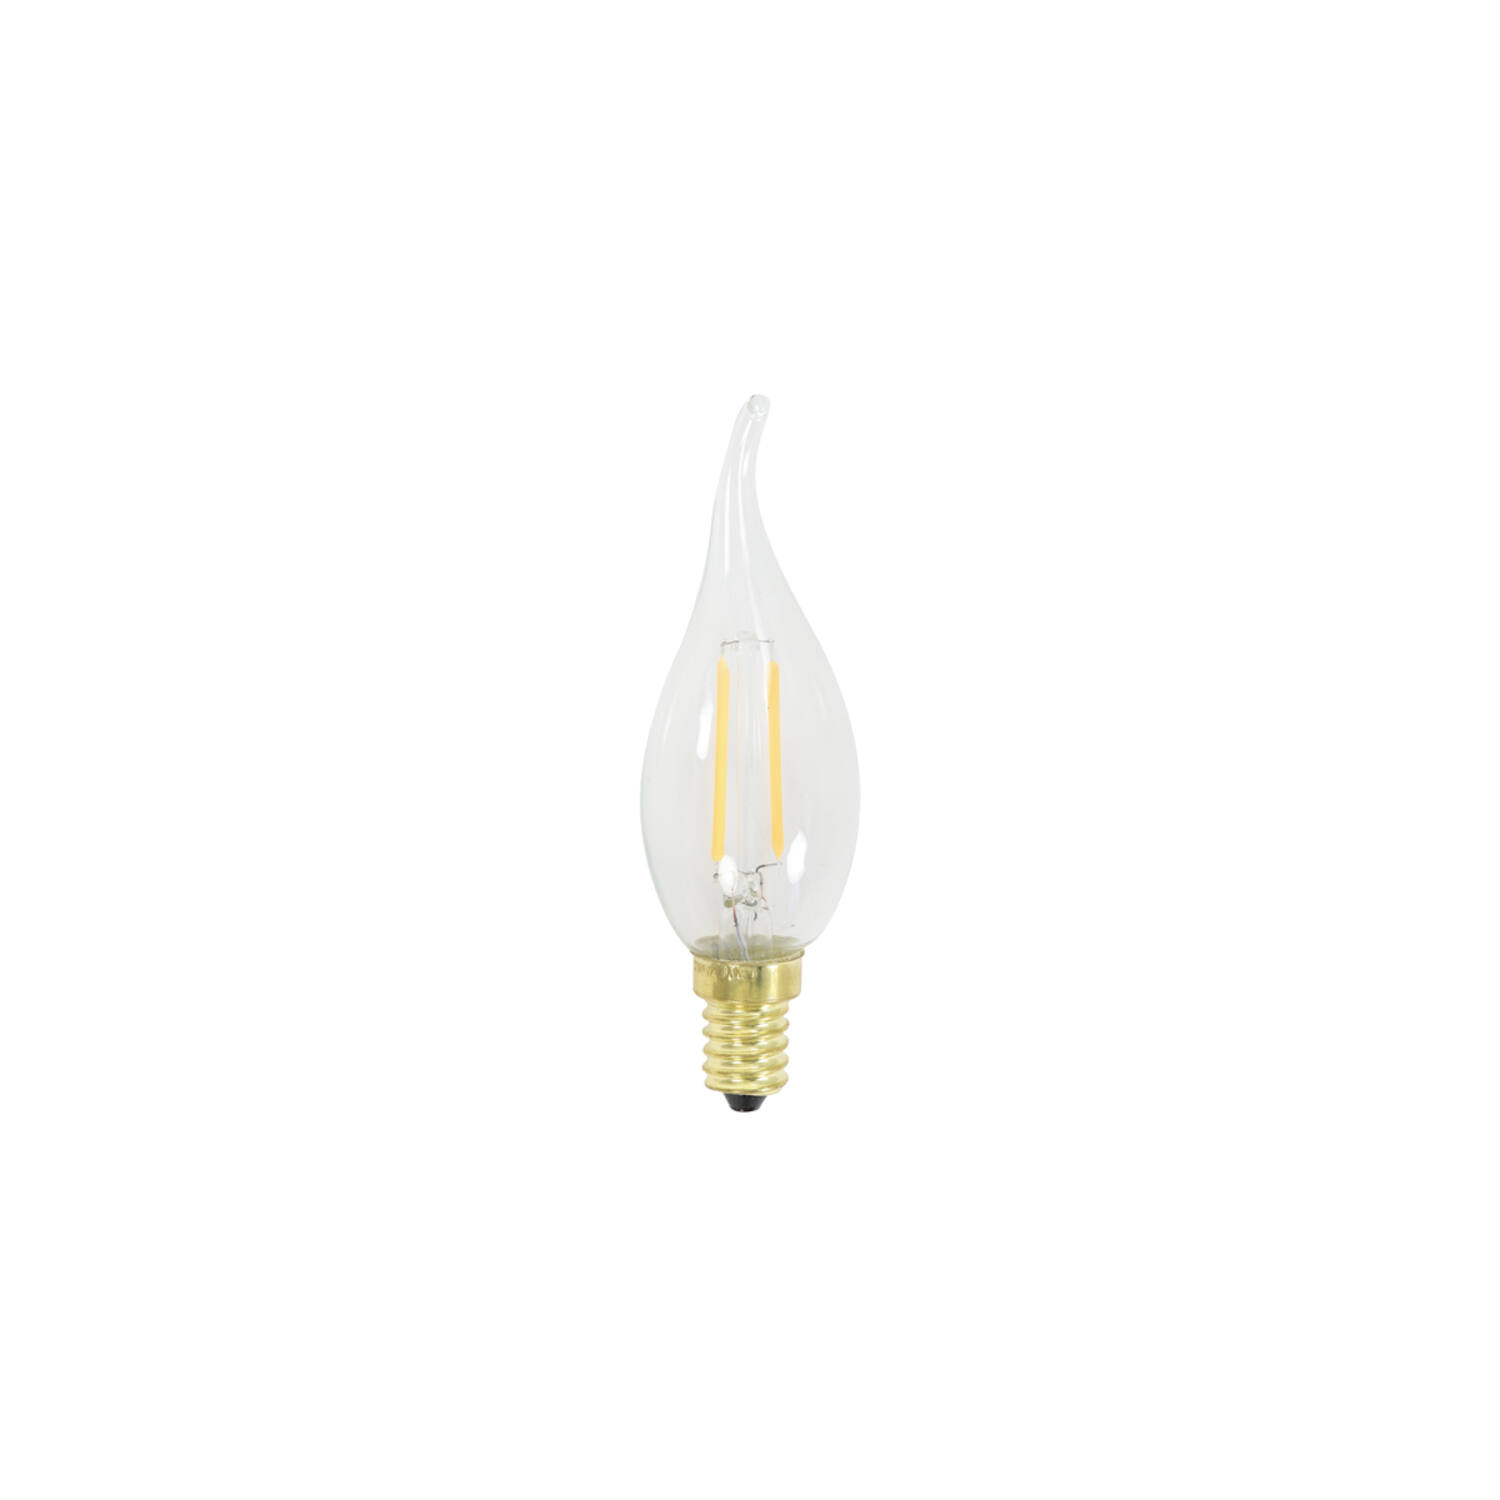 Deco LED candle Ø3,5x12 cm LIGHT 2W clear E14 dimmable